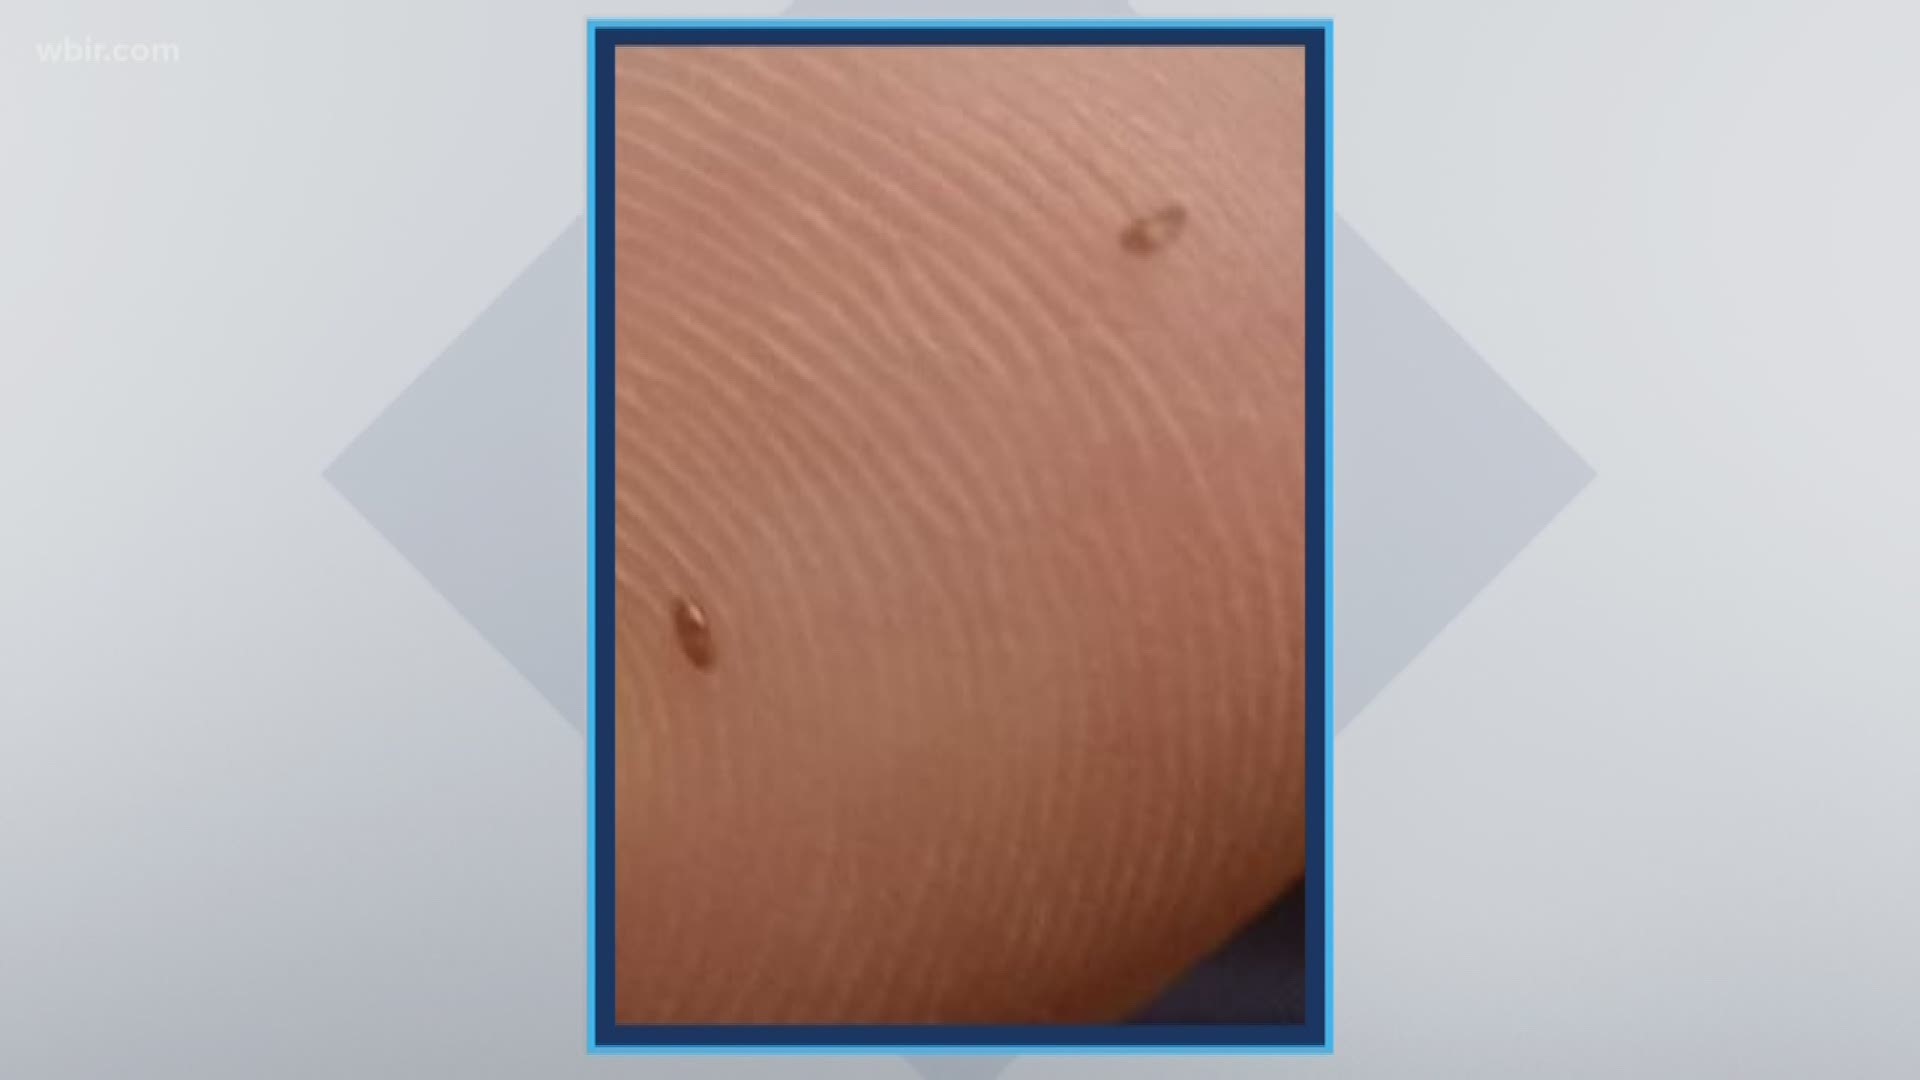 Melissa Brown said it started after her son went swimming in Harrison Bay State Park. Hours later, he started complaining about pain in his eyes. She took him to the hospital after noticing black dots. Eventually, those small bugs slid out of his eyes.